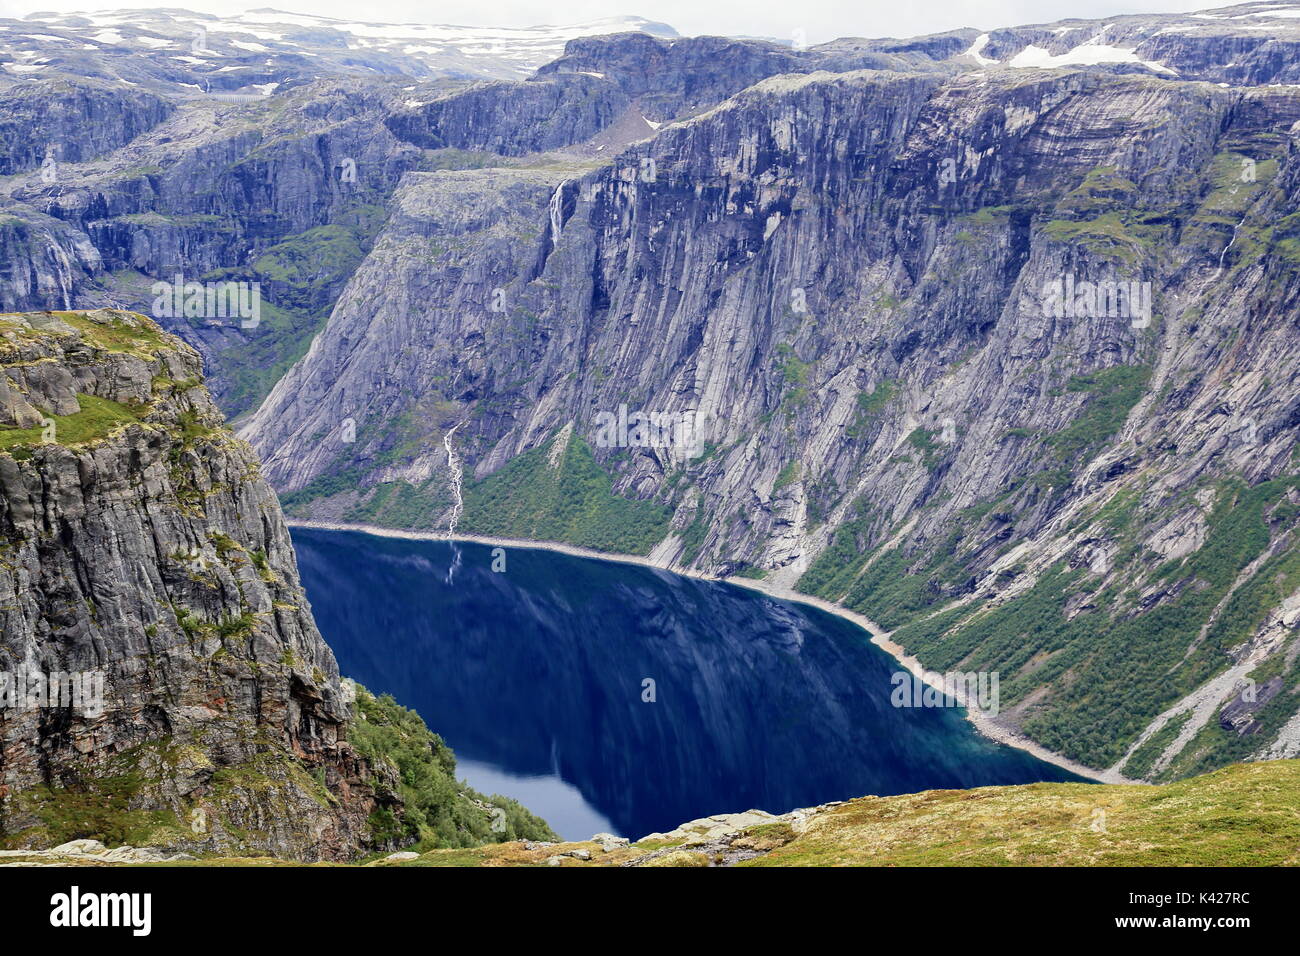 Scenery of Ringedalsvatnet lake in the vicinity of Trolltunga rock formation in Norway Stock Photo